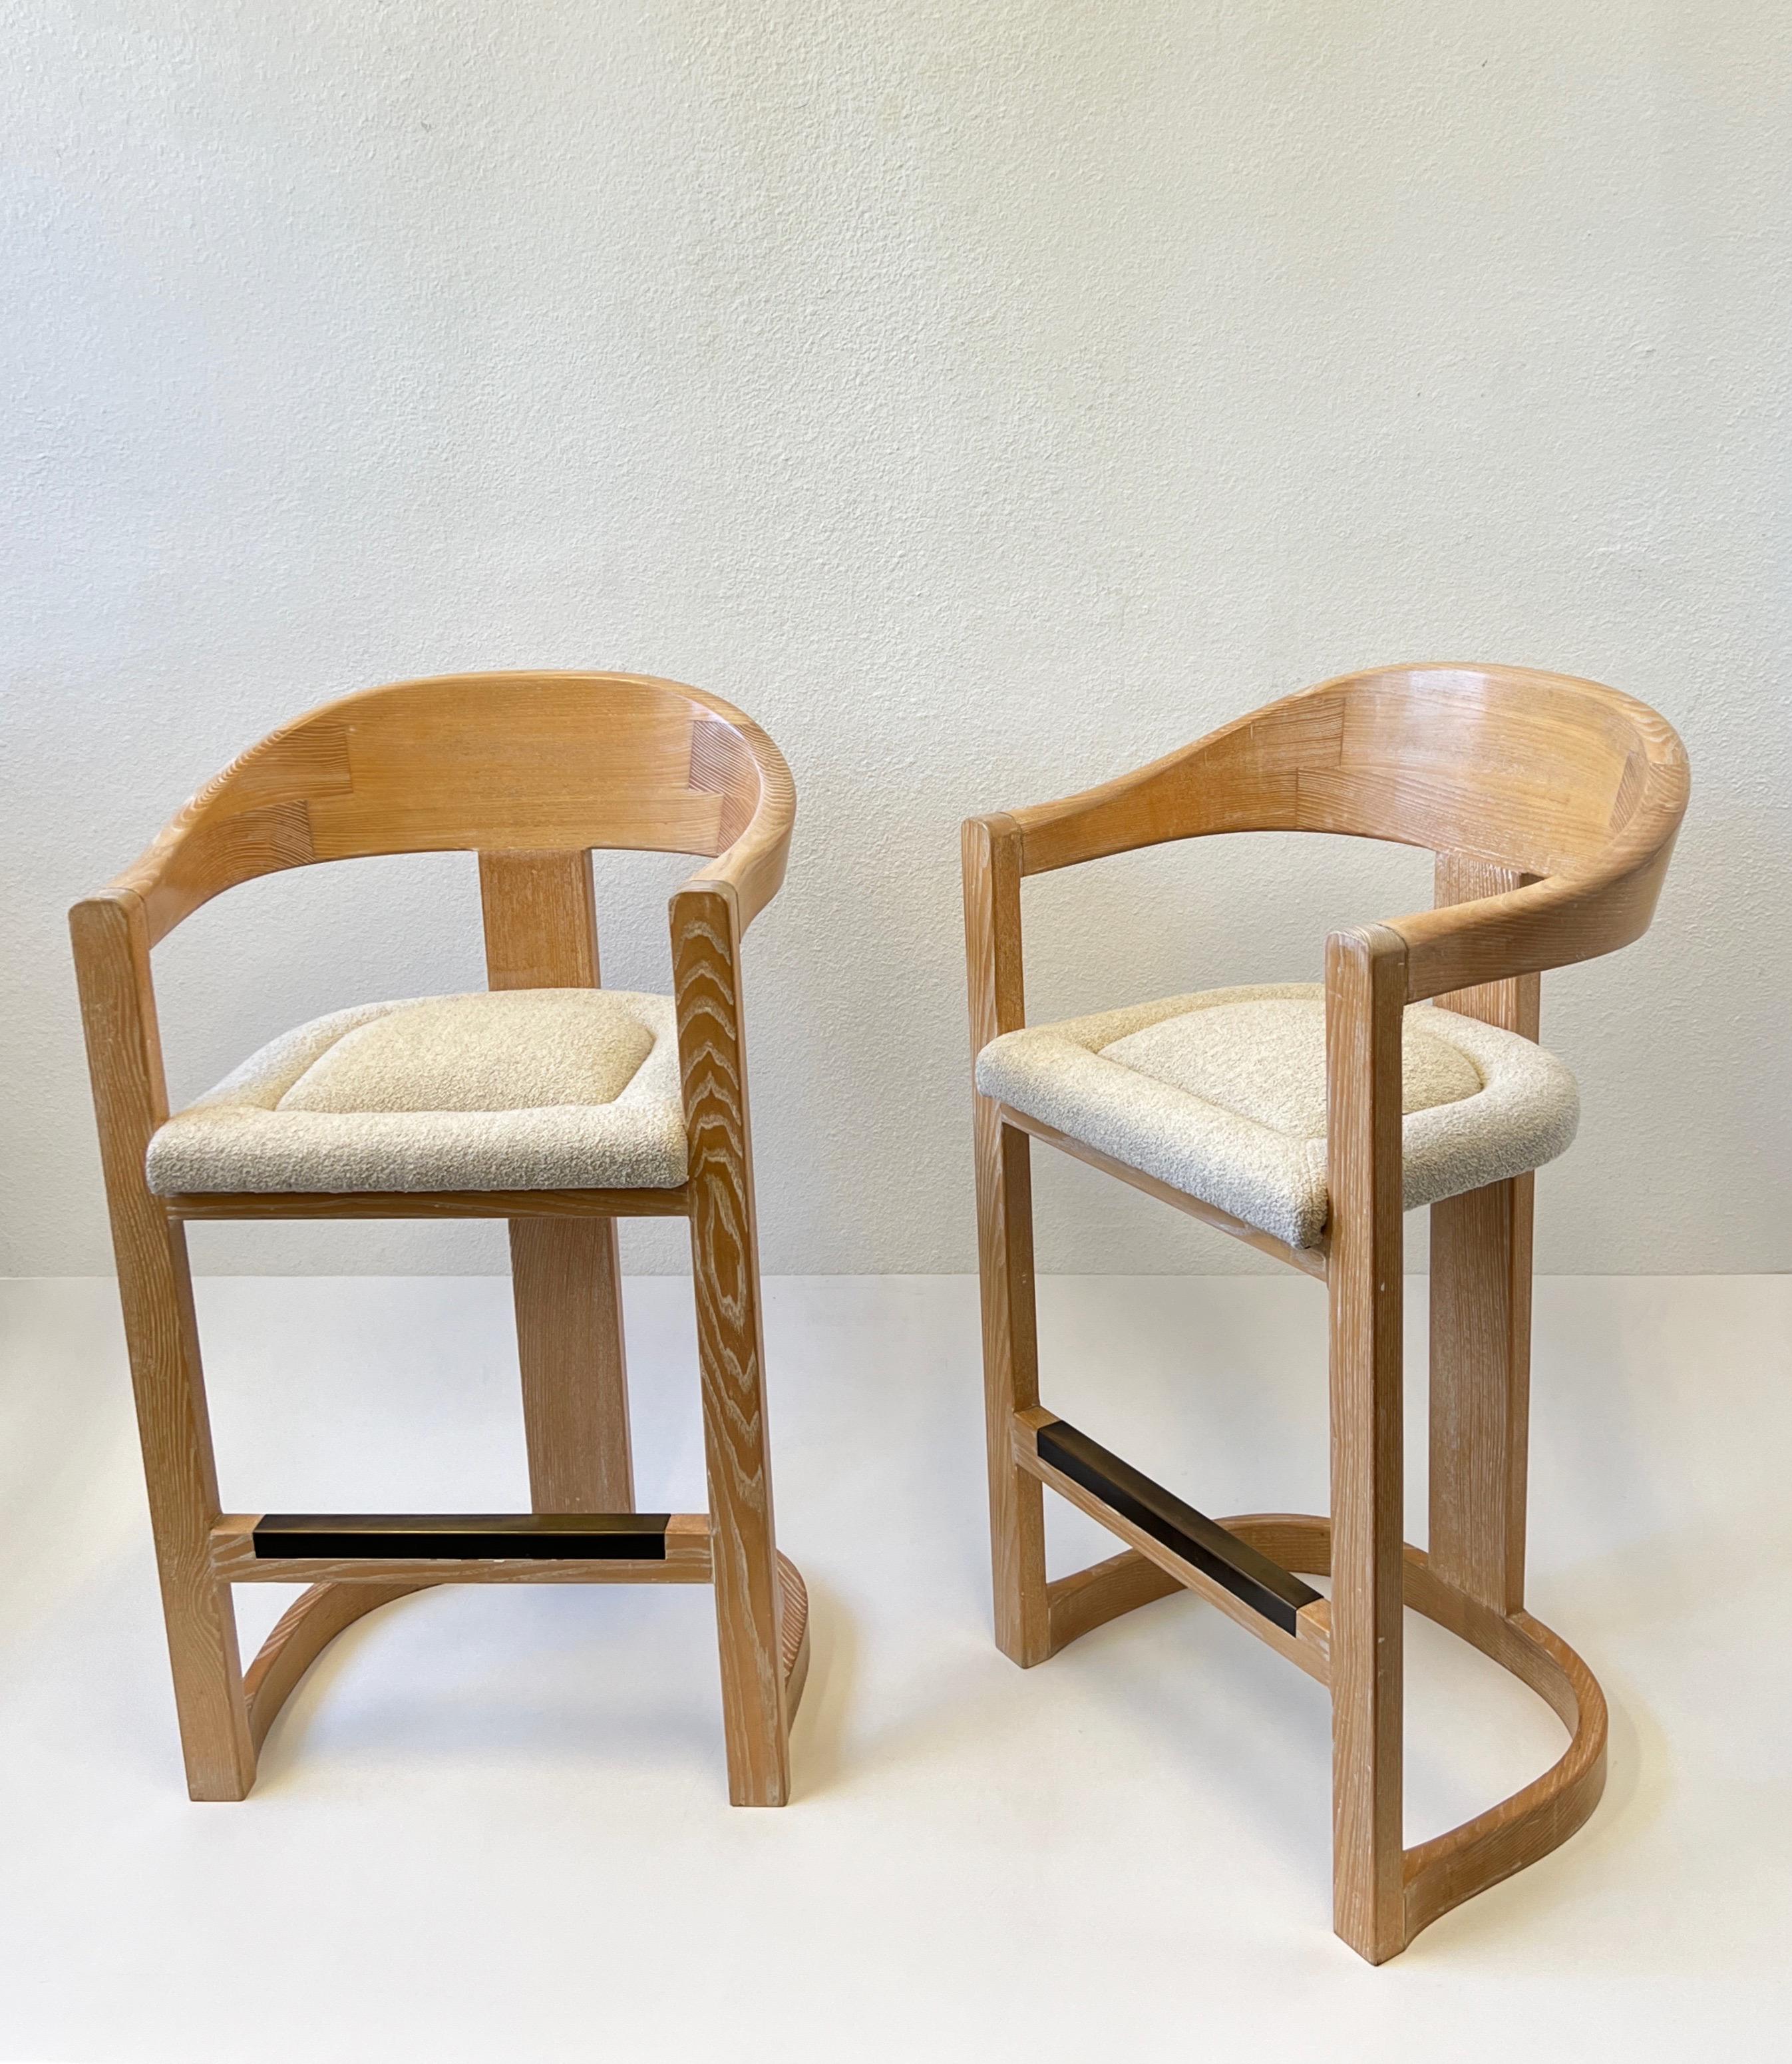 Pair of glamorous 1980’s “Onassis”Barstools by Karl Springer. 
Constructed of whitewashed dowelwood and aged bronze footrests, the seats are newly recovered in Italian natural sheep wool boucle fabric. 
The frames are in original vintage